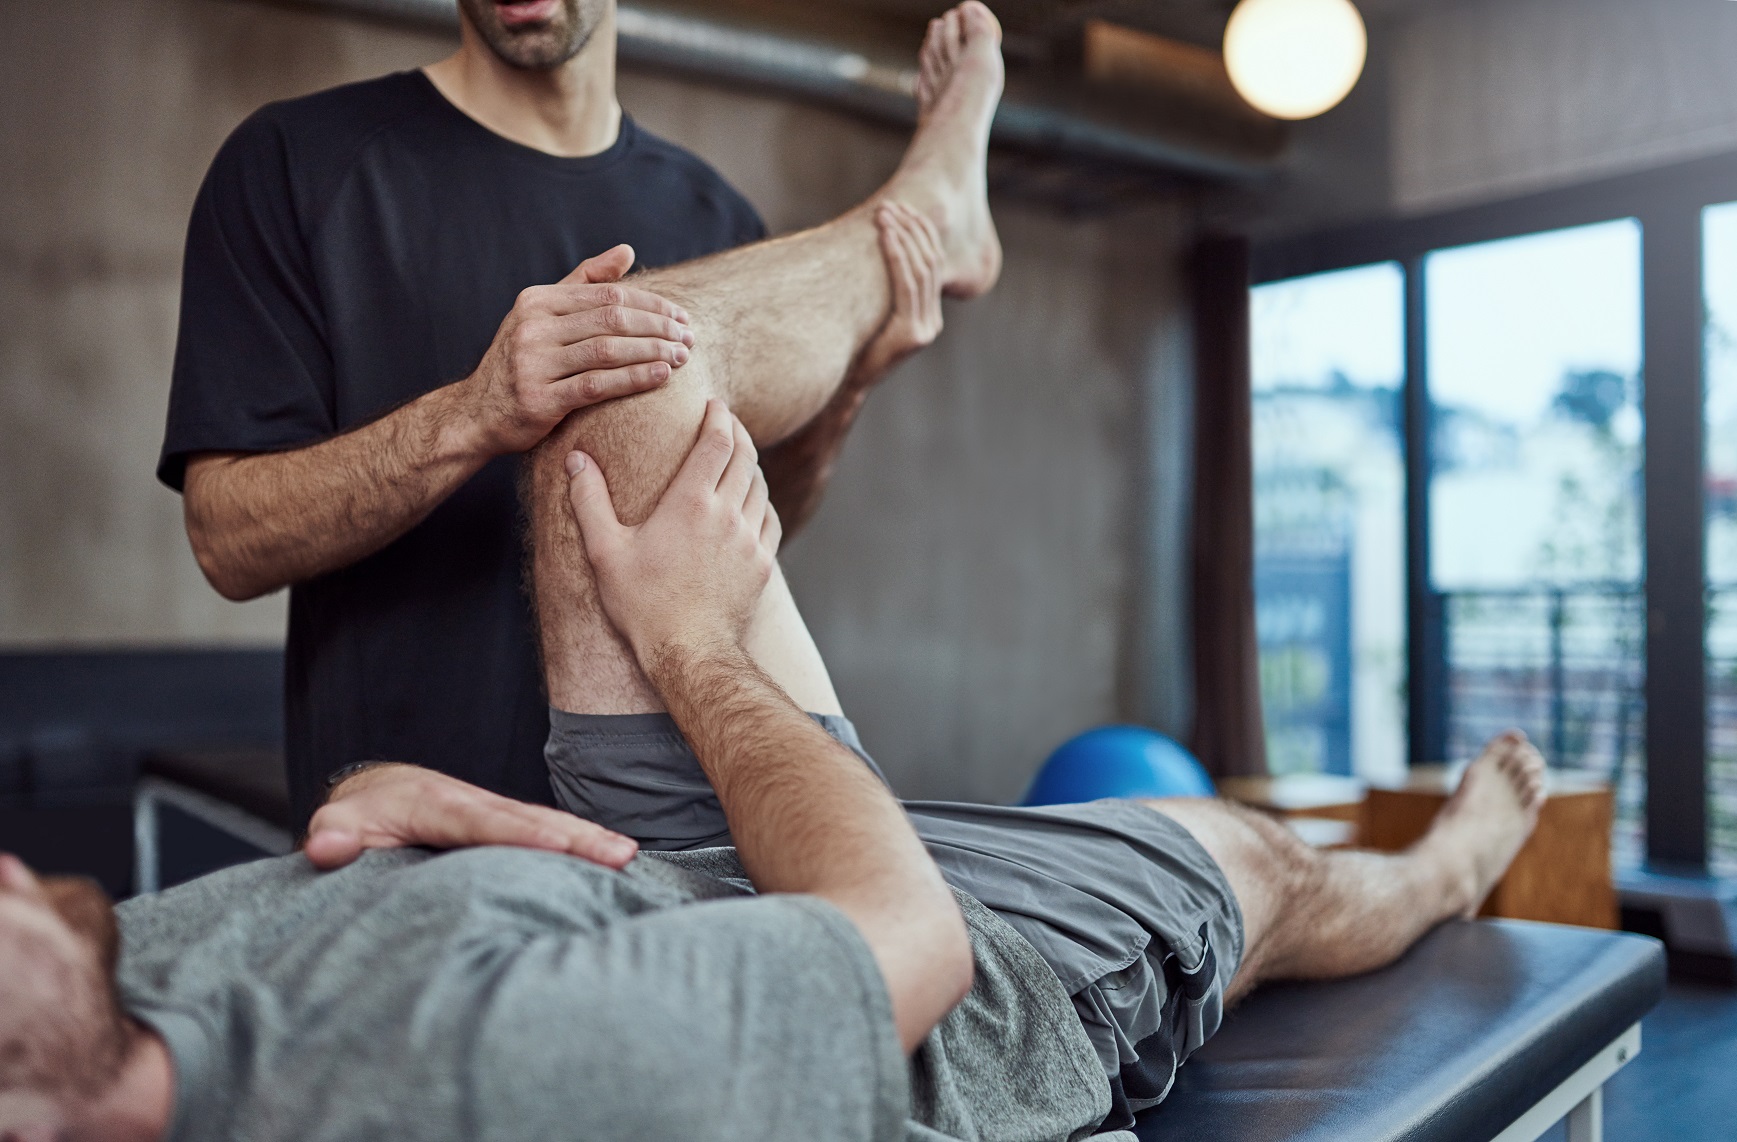 What are the benefits of quality physio treatment?